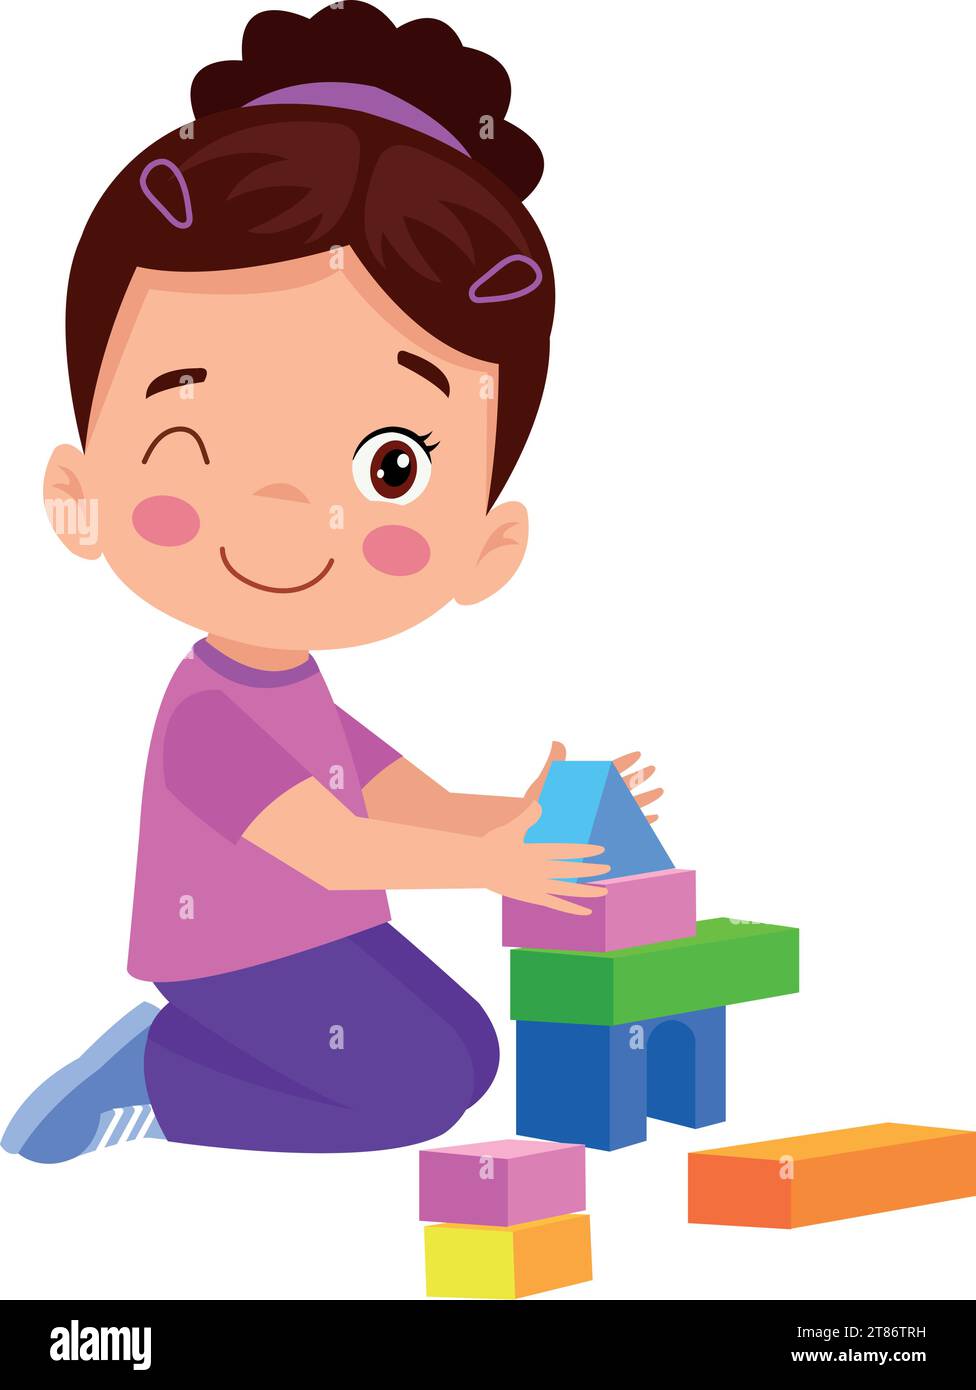 Vector Illustration Of Kid Playing With Building Blocks Stock Vector